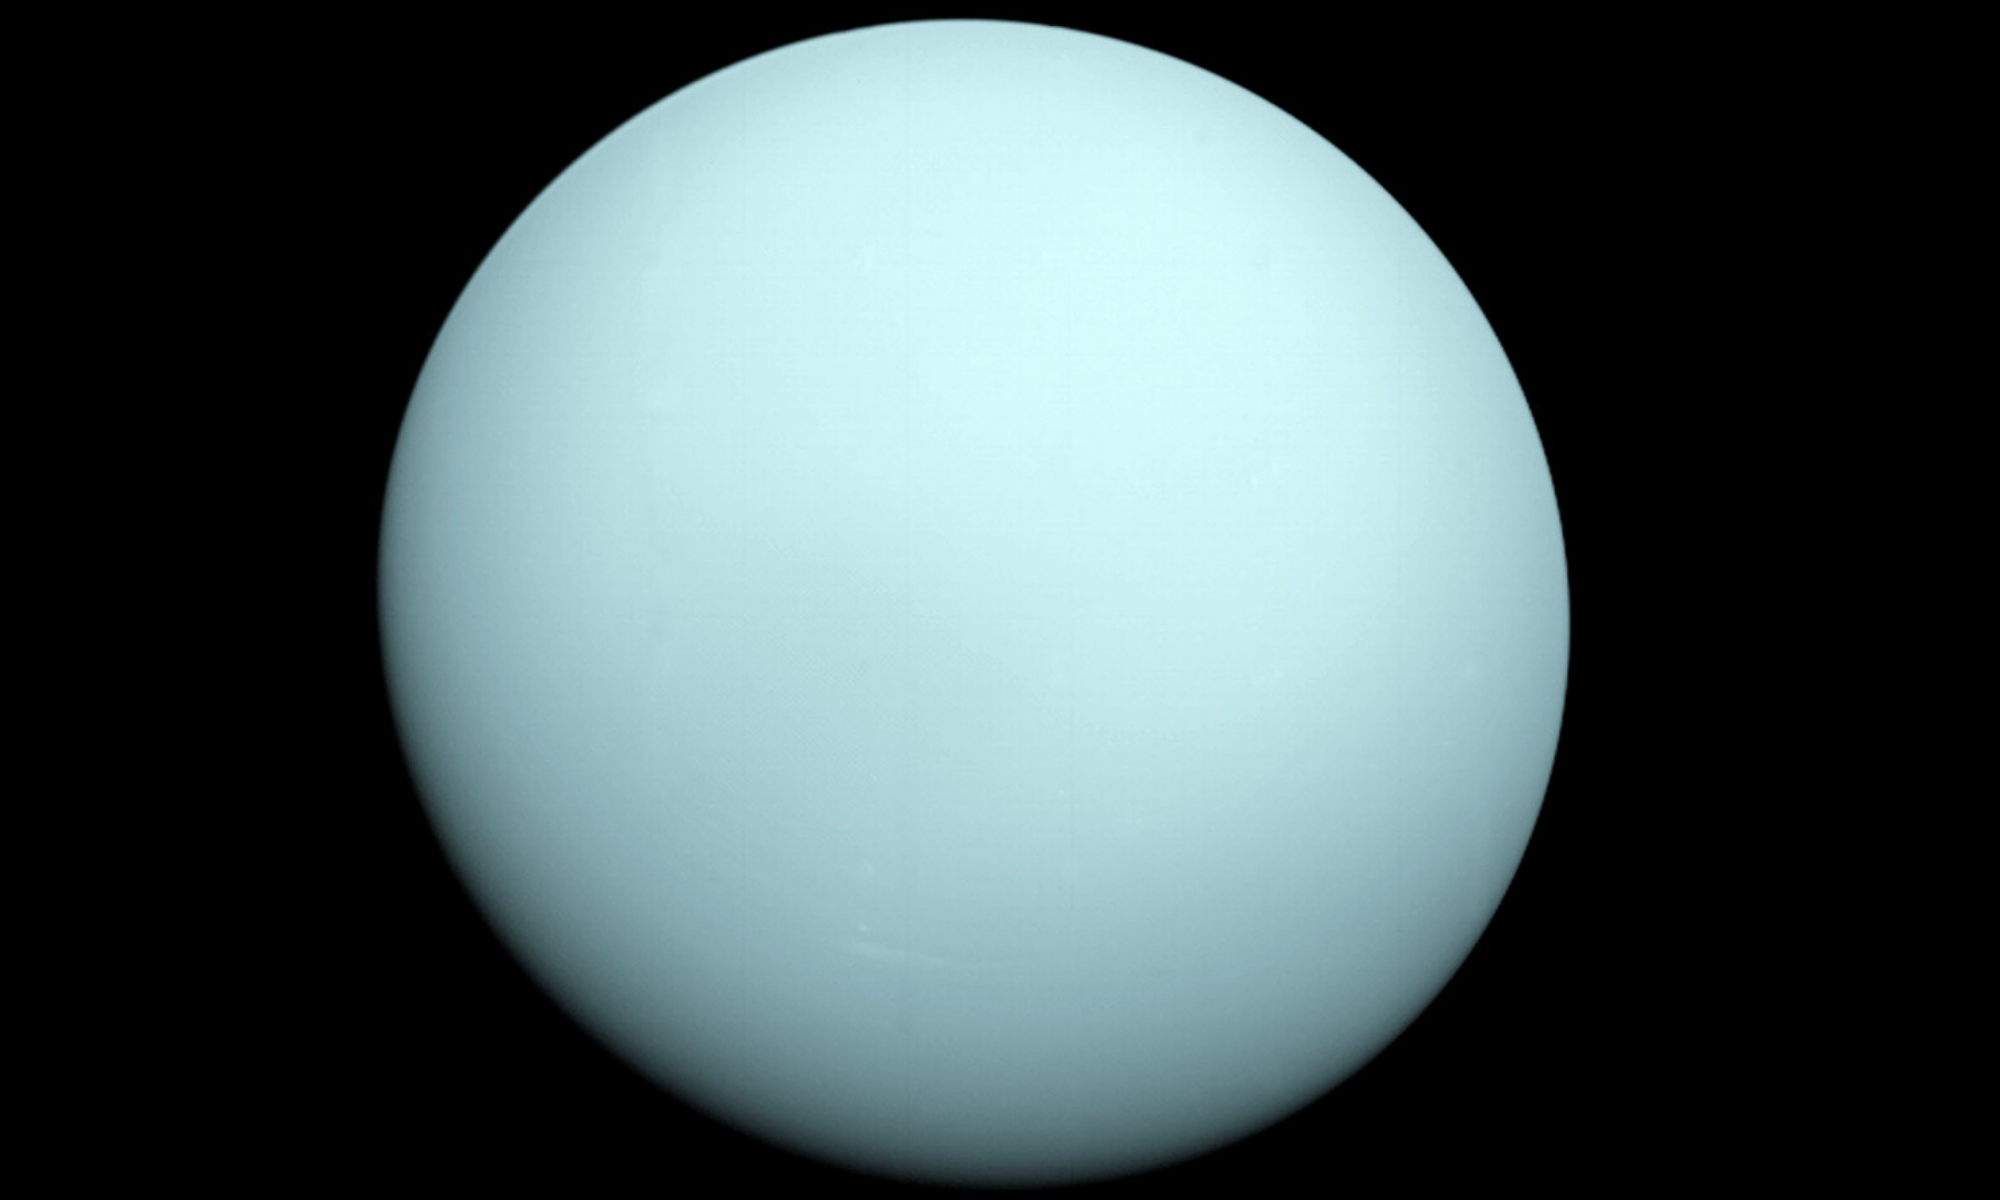 What Color Is Uranus and How Many Moons Does It Have?